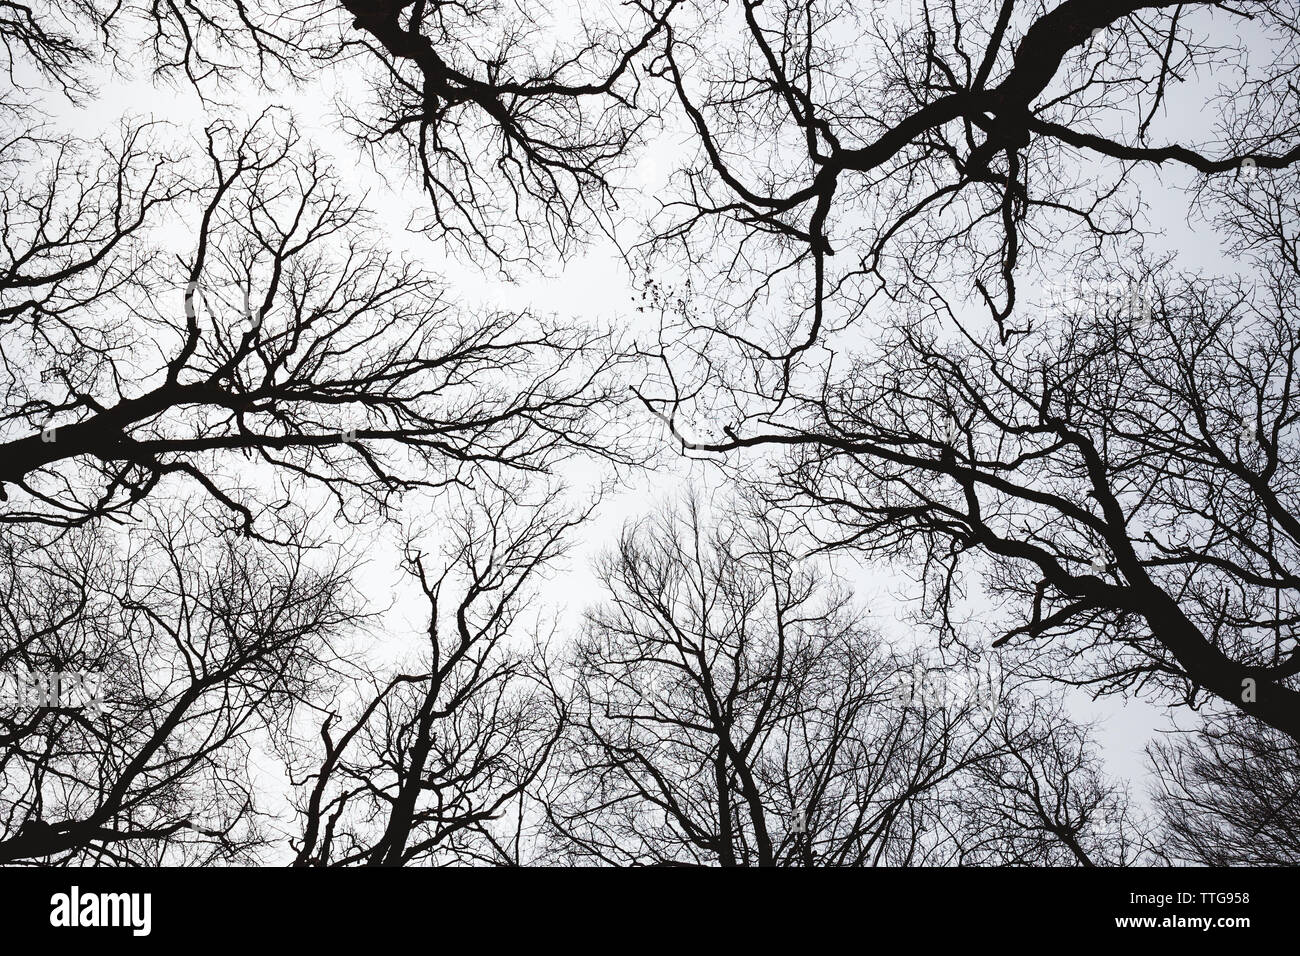 looking up through leafless tree branches Stock Photo